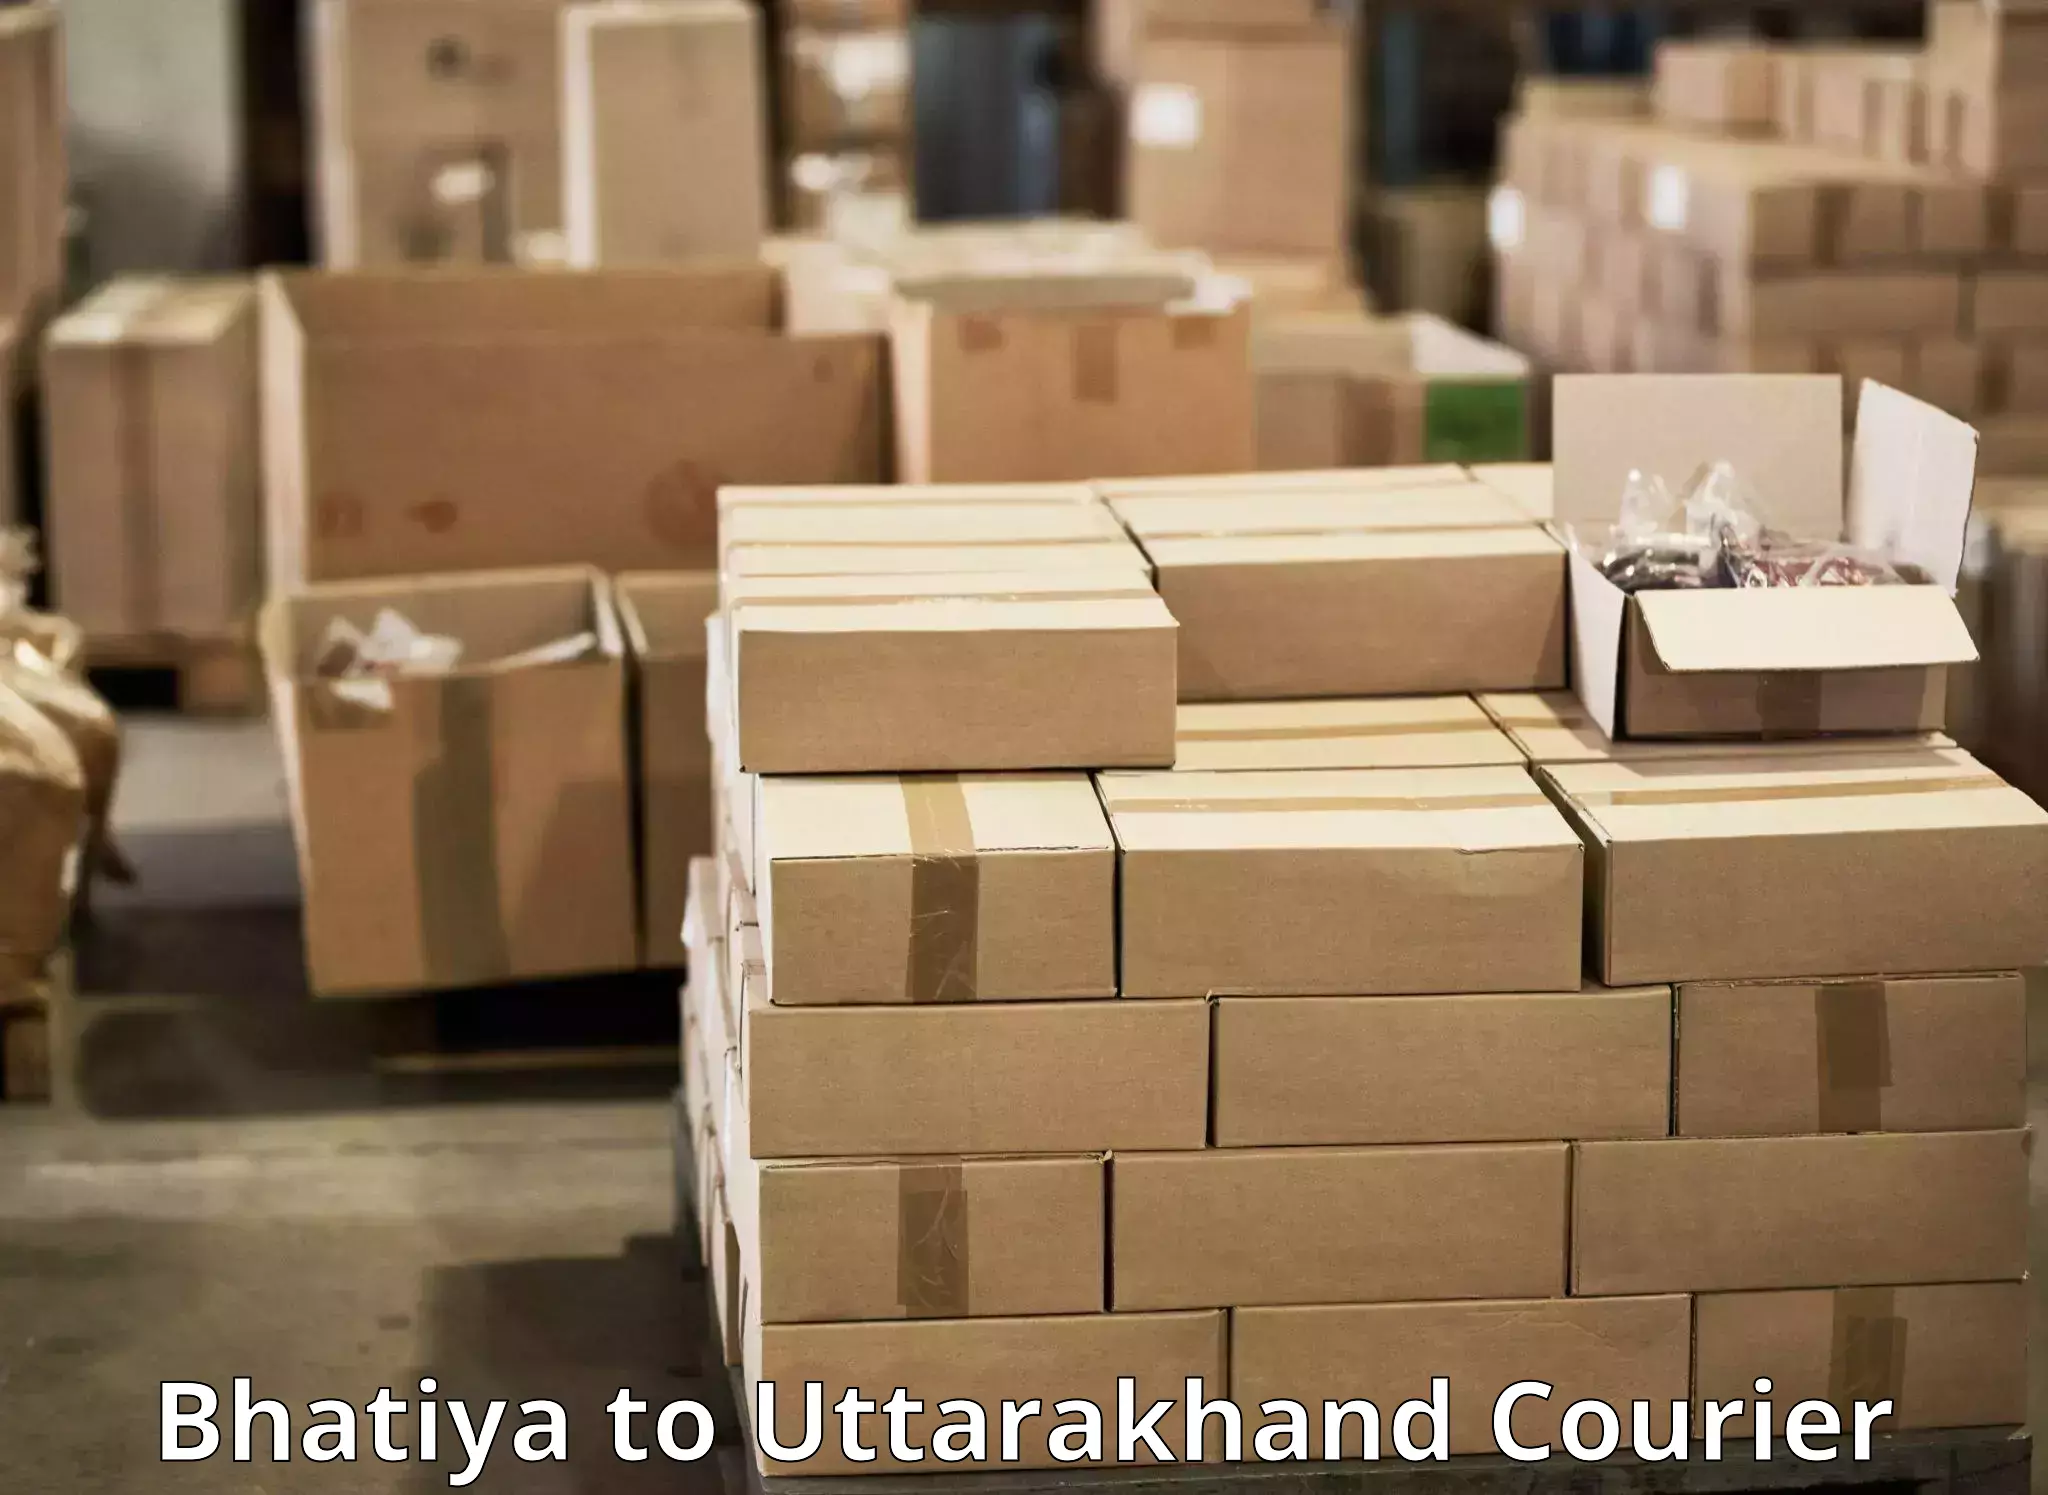 Parcel service for businesses Bhatiya to Almora